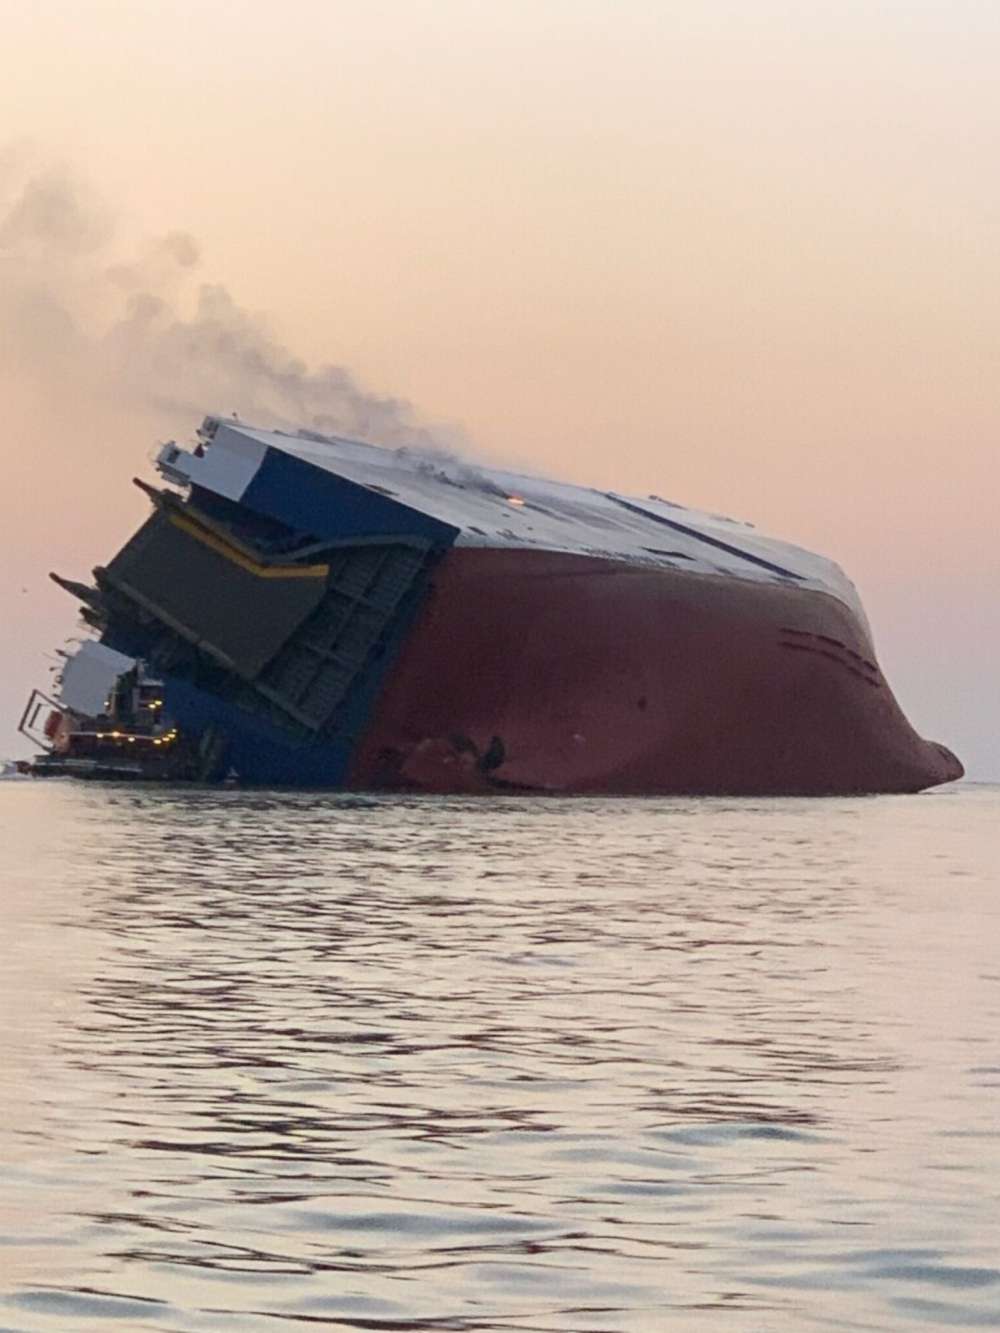 PHOTO: A cargo ship caught fire and overturned in the St. Simons Sound off Brunswick, Ga., Sept. 8, 2019.